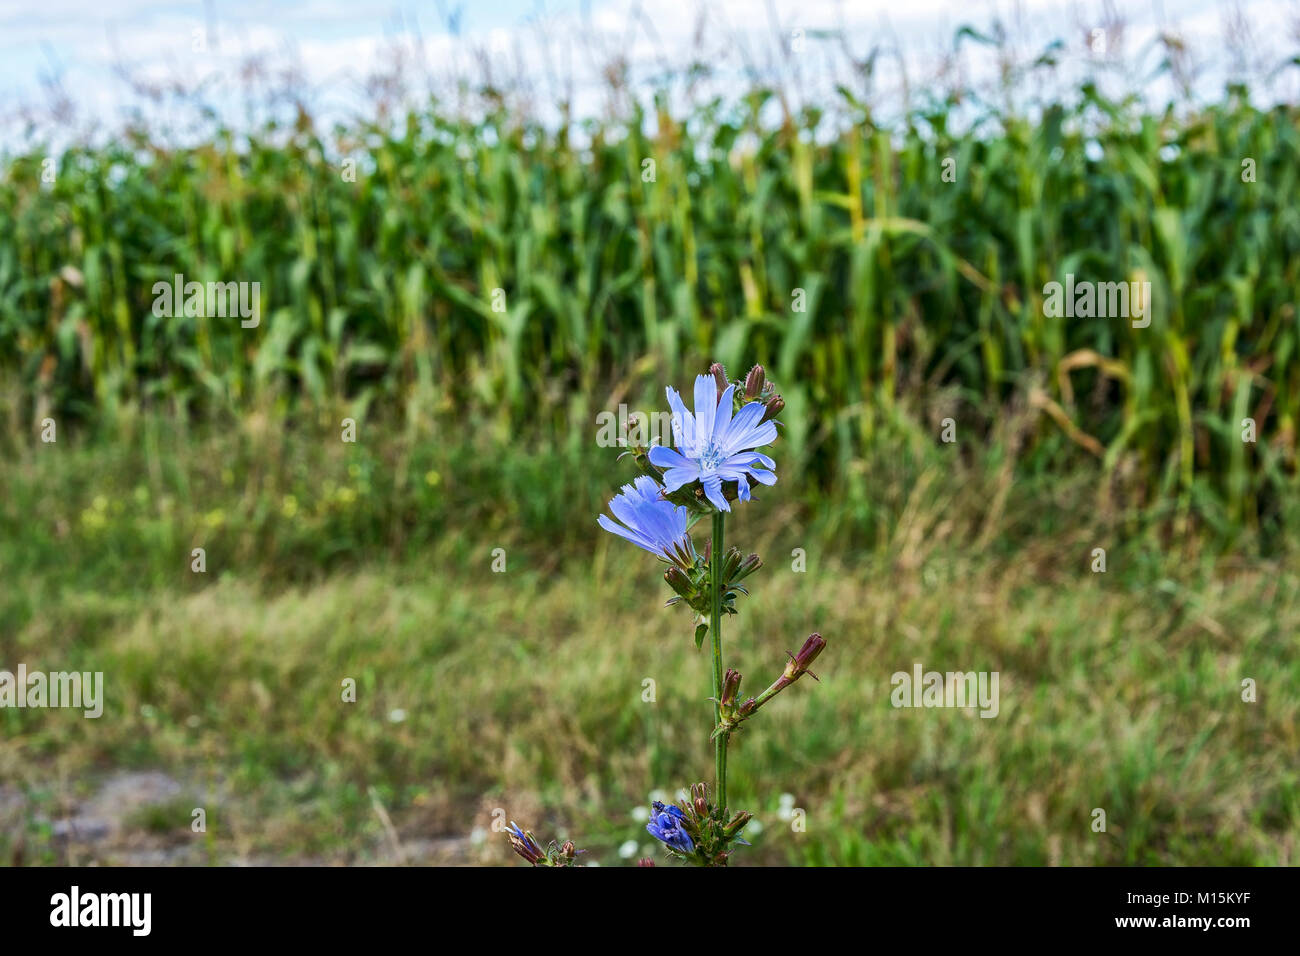 On blurred background of a corn field growing blue flowered chicory Stock Photo